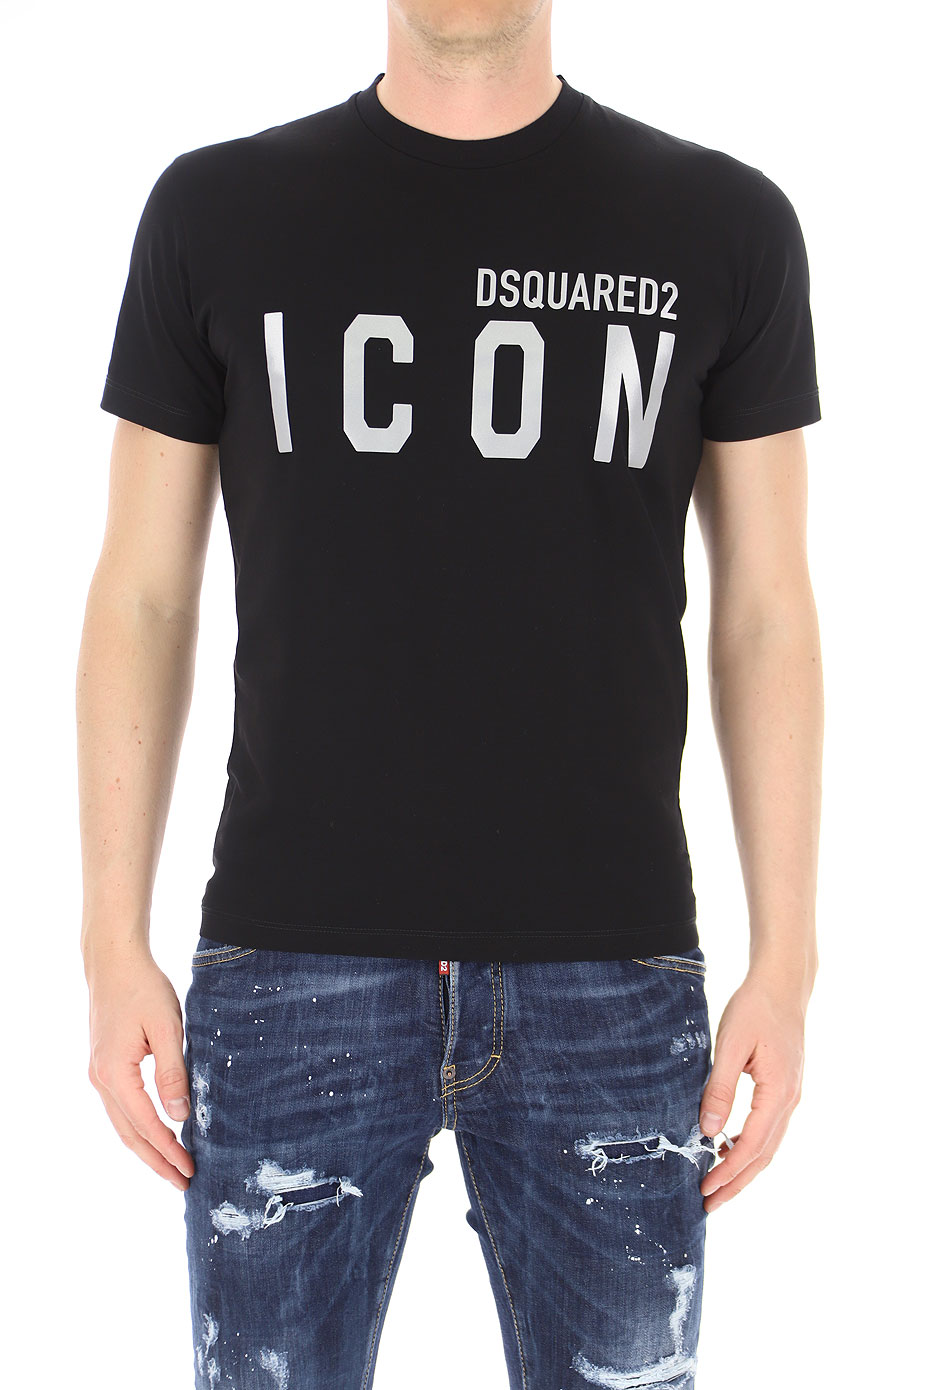 Mens Clothing Dsquared2, Style code: gc0019-s23009-984